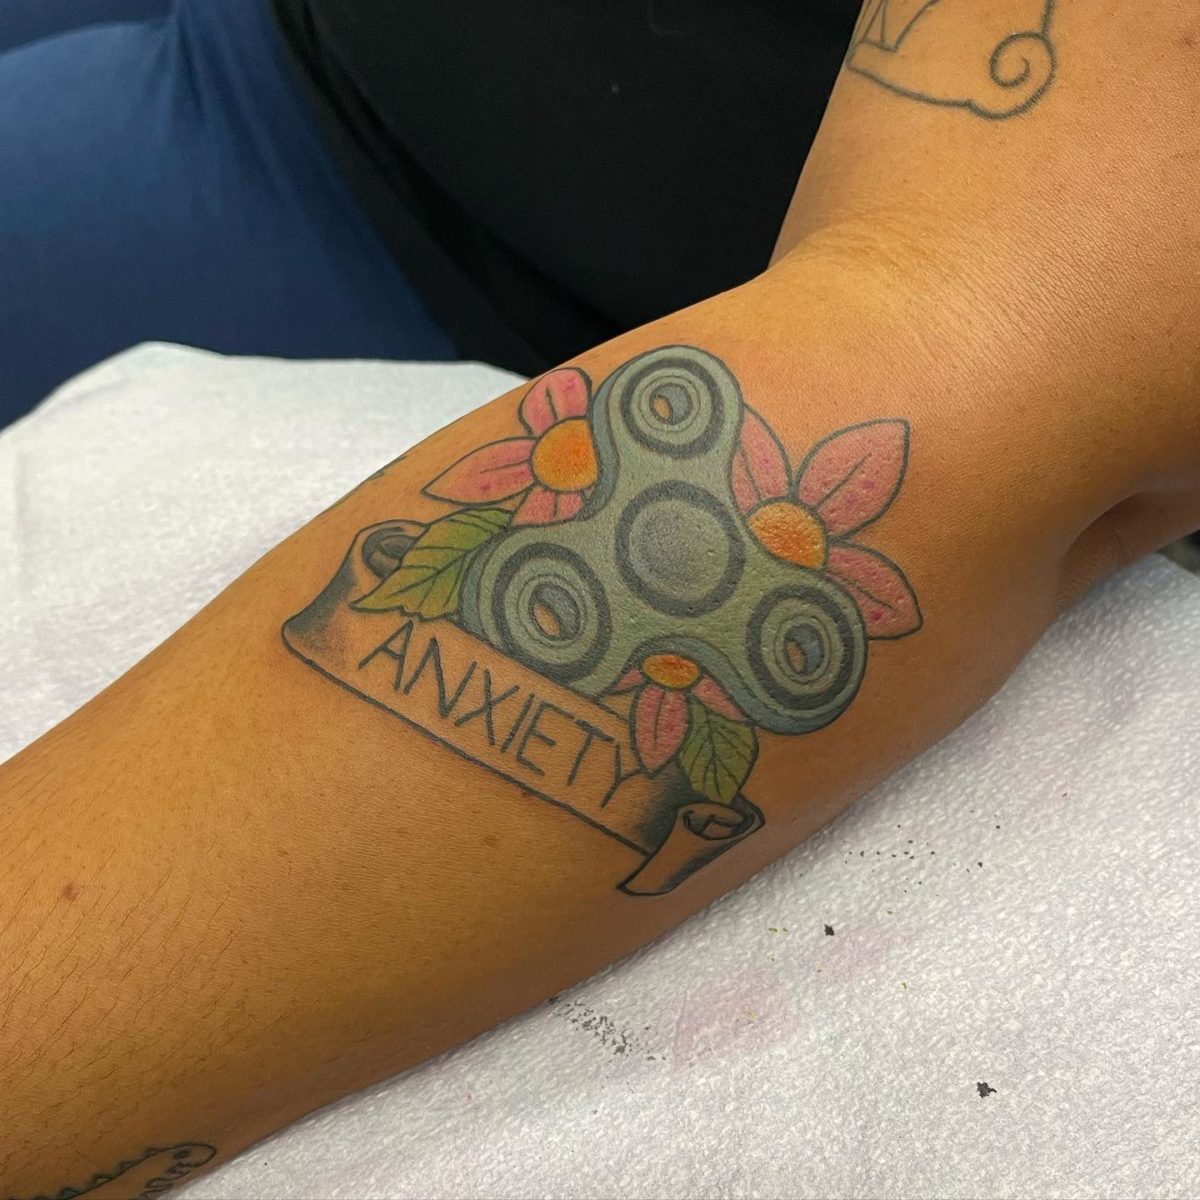 50 mental health tattoos that raise awareness of depression & anxiety | mental health tattoos raise awareness and show solidarity. take a look at the meaningful designs we found!